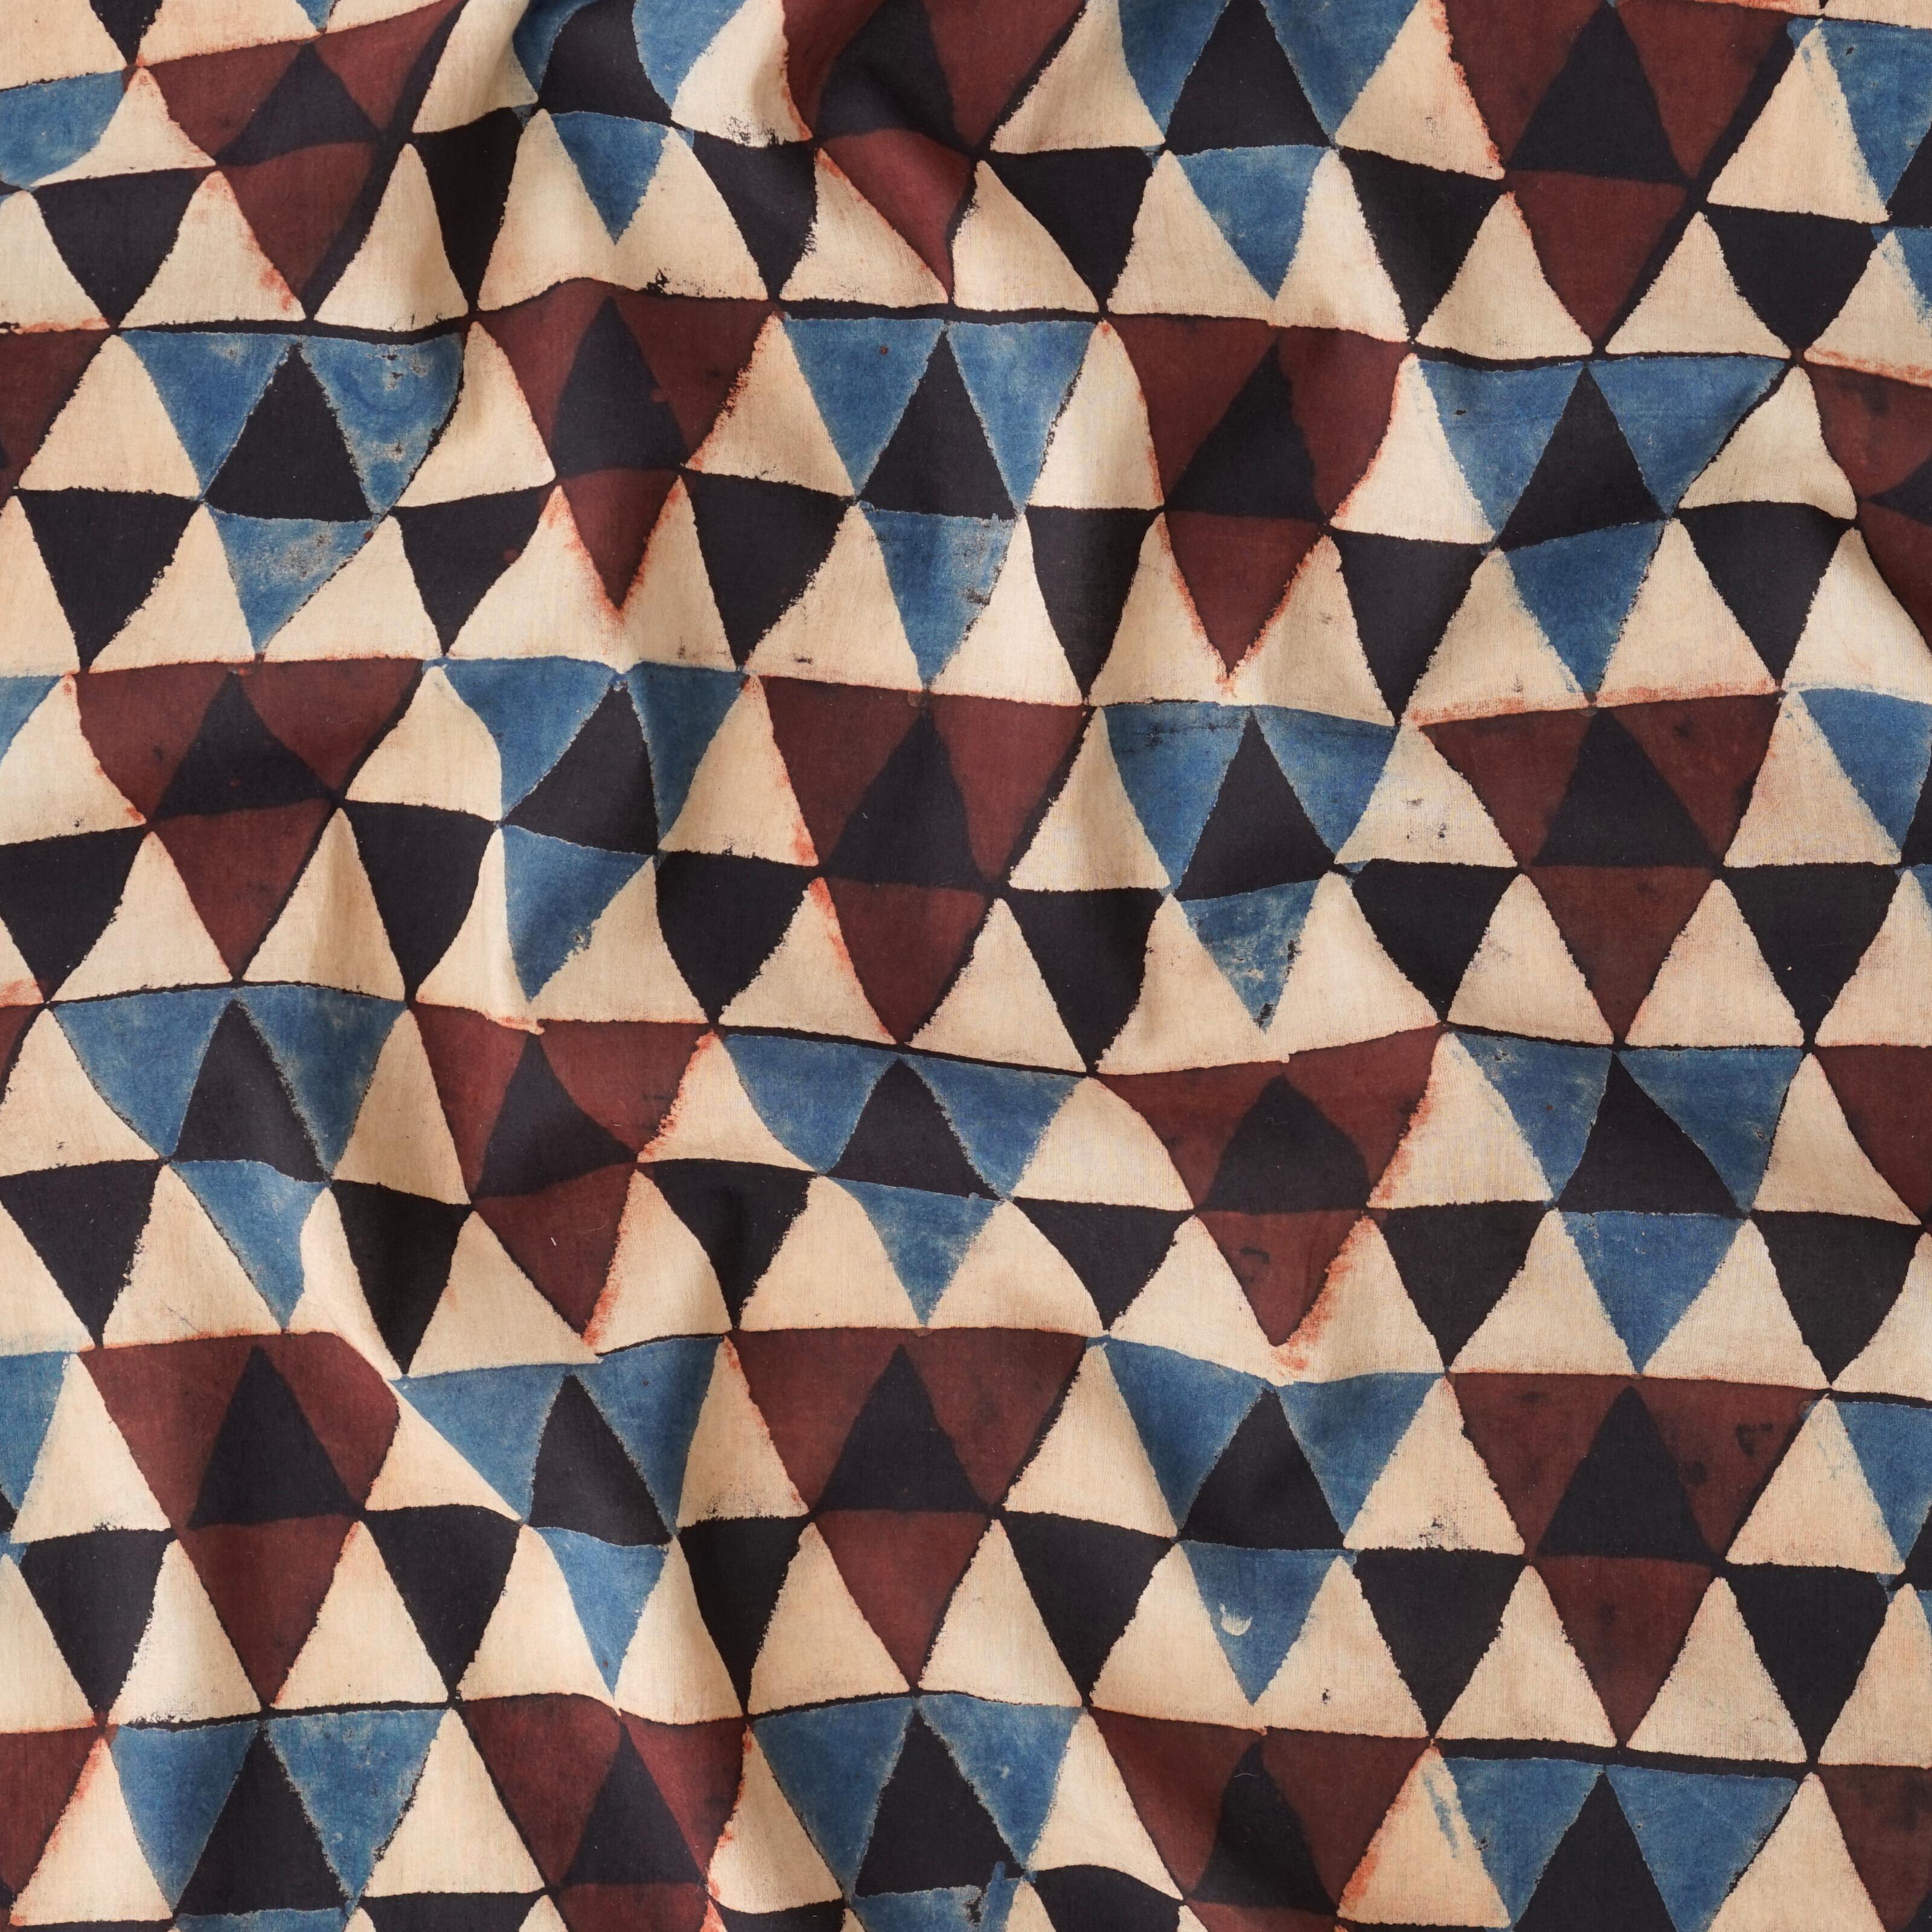 2 - SIK53 - Hand Block-Printed Cotton - Aula Triangles Design - Indigo Blue, Black, Alizarin Red Dyes - Contrast